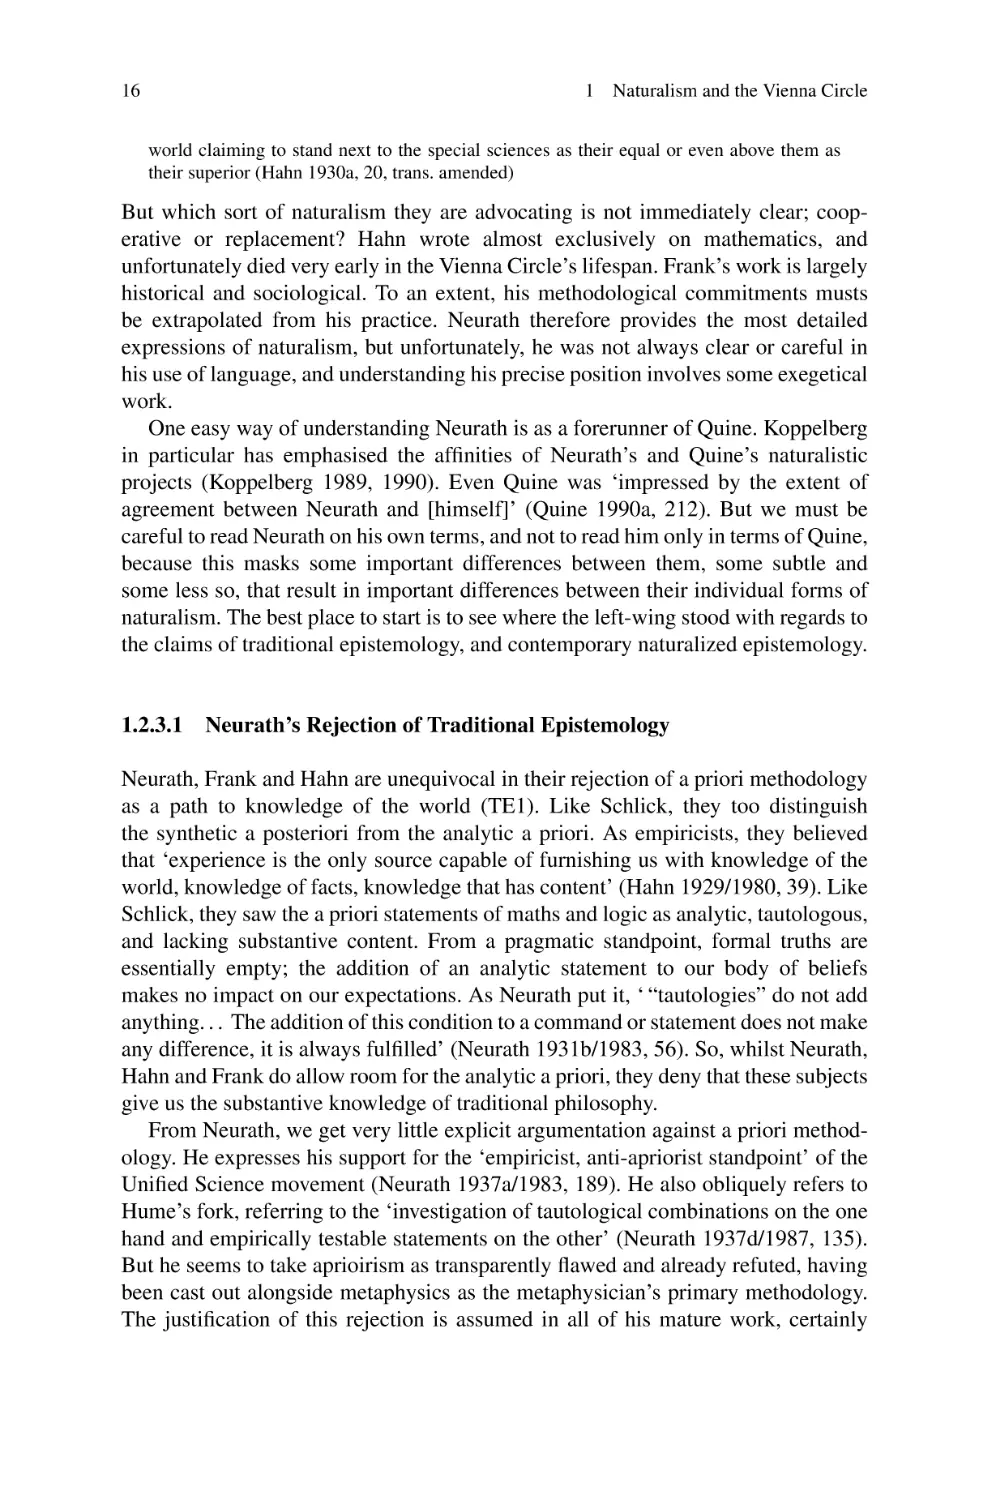 1.2.3.1 Neurath's Rejection of Traditional Epistemology